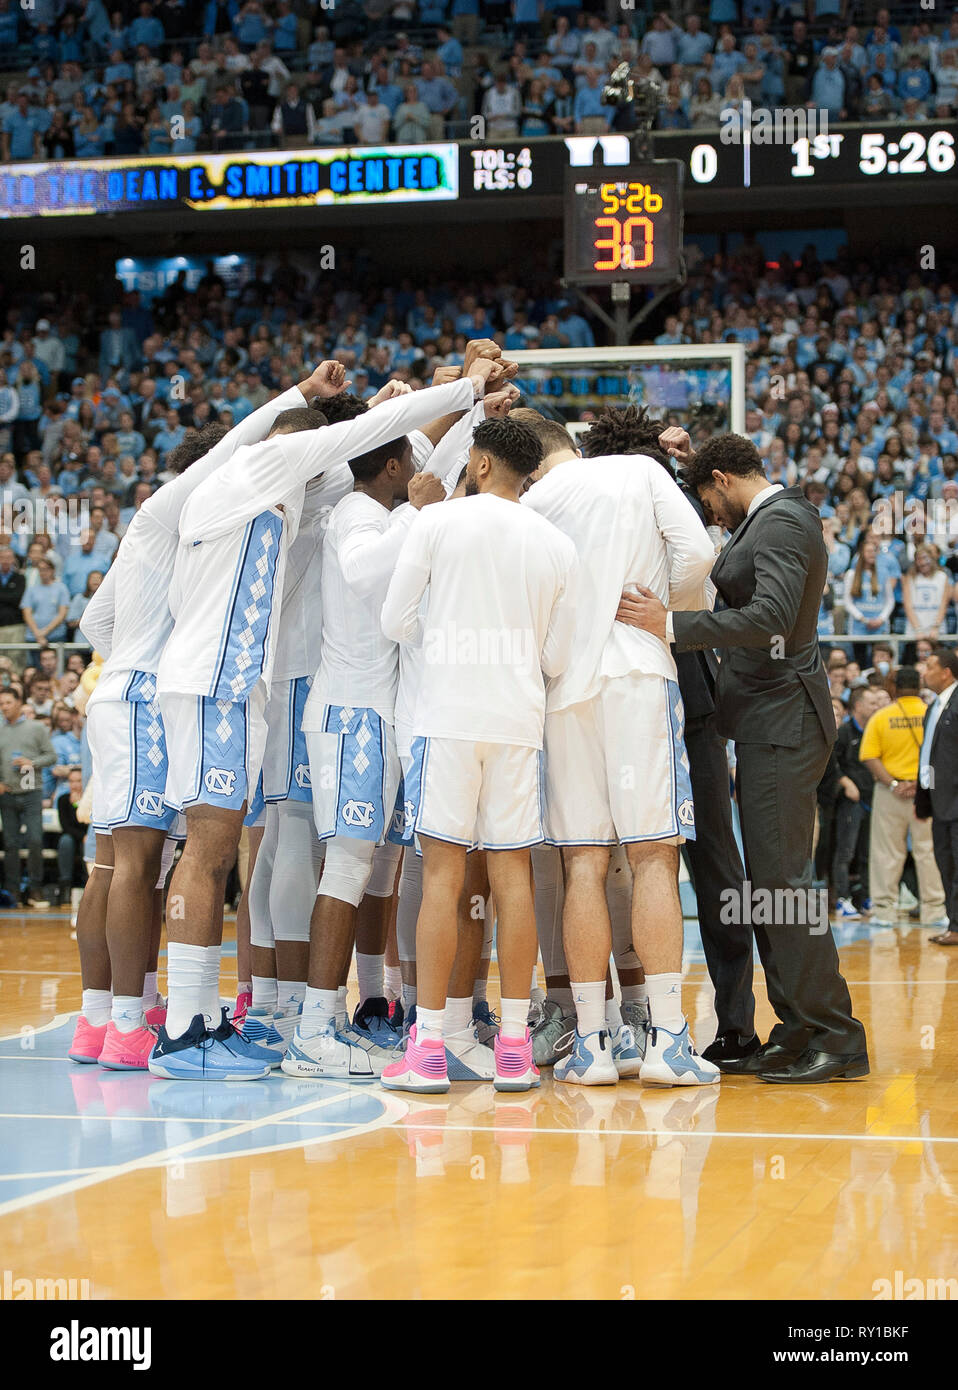 March 9, 2019 - Chapel Hill, North Carolina; USA - North Carolina Tar Heels huddle as the University of North Carolina Tar Heels defeated the Duke Blue Devils with a final score of 79-70 as they played mens college basketball at the Dean Smith Center located in Chapel Hill. Copyright 2019 Jason Moore. Credit: Jason Moore/ZUMA Wire/Alamy Live News Stock Photo